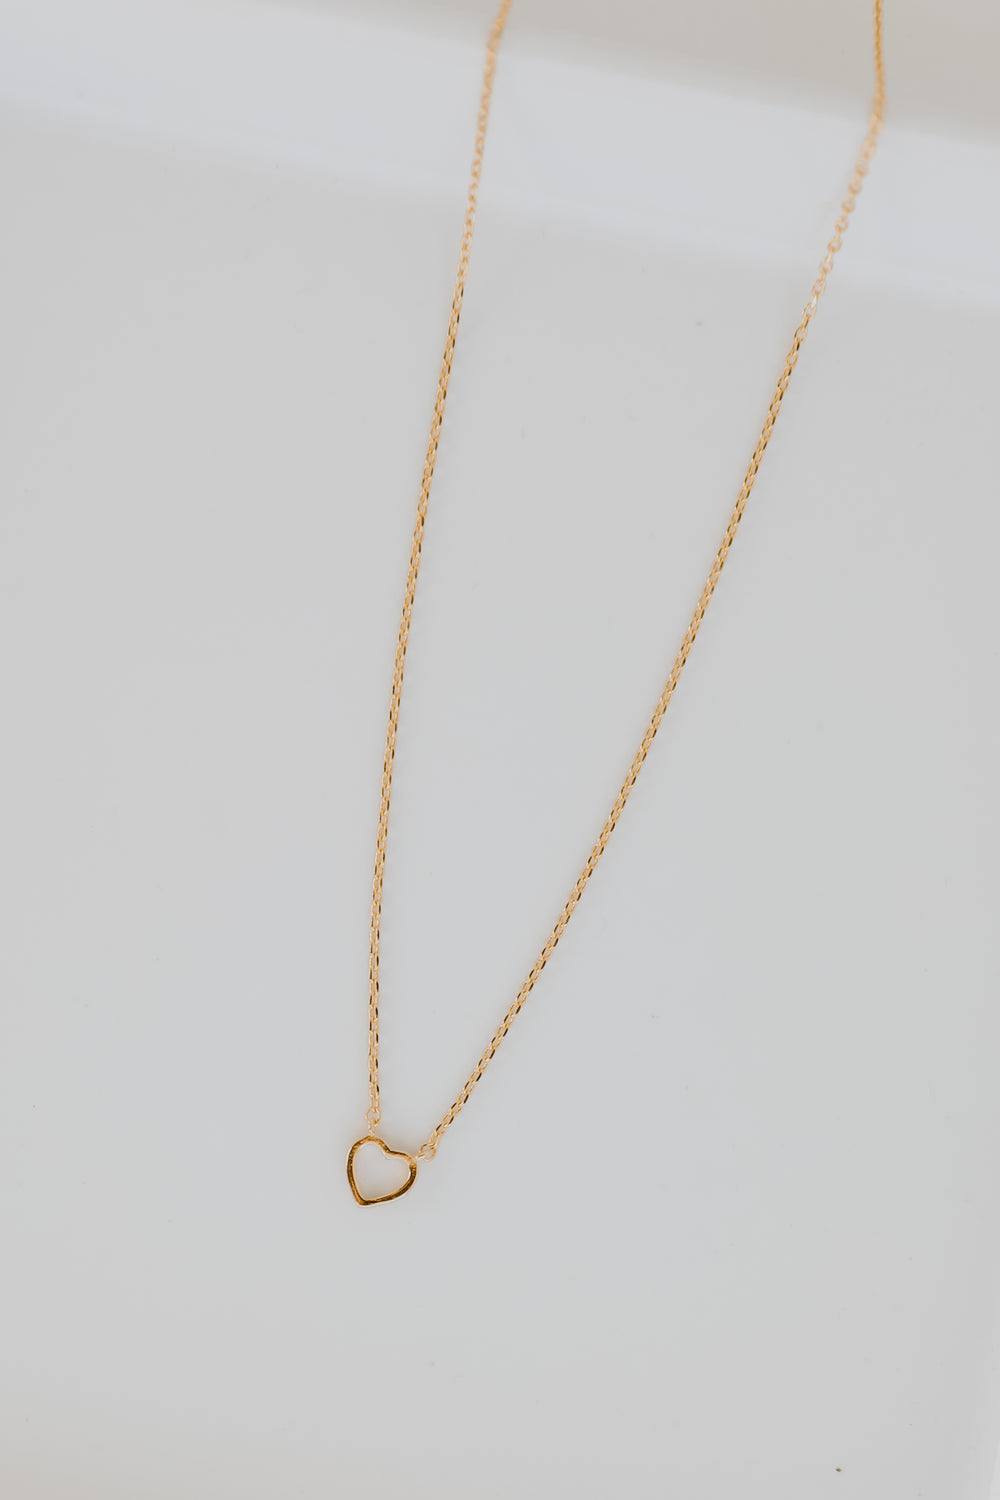 Gold Heart Charm Necklace from dress up